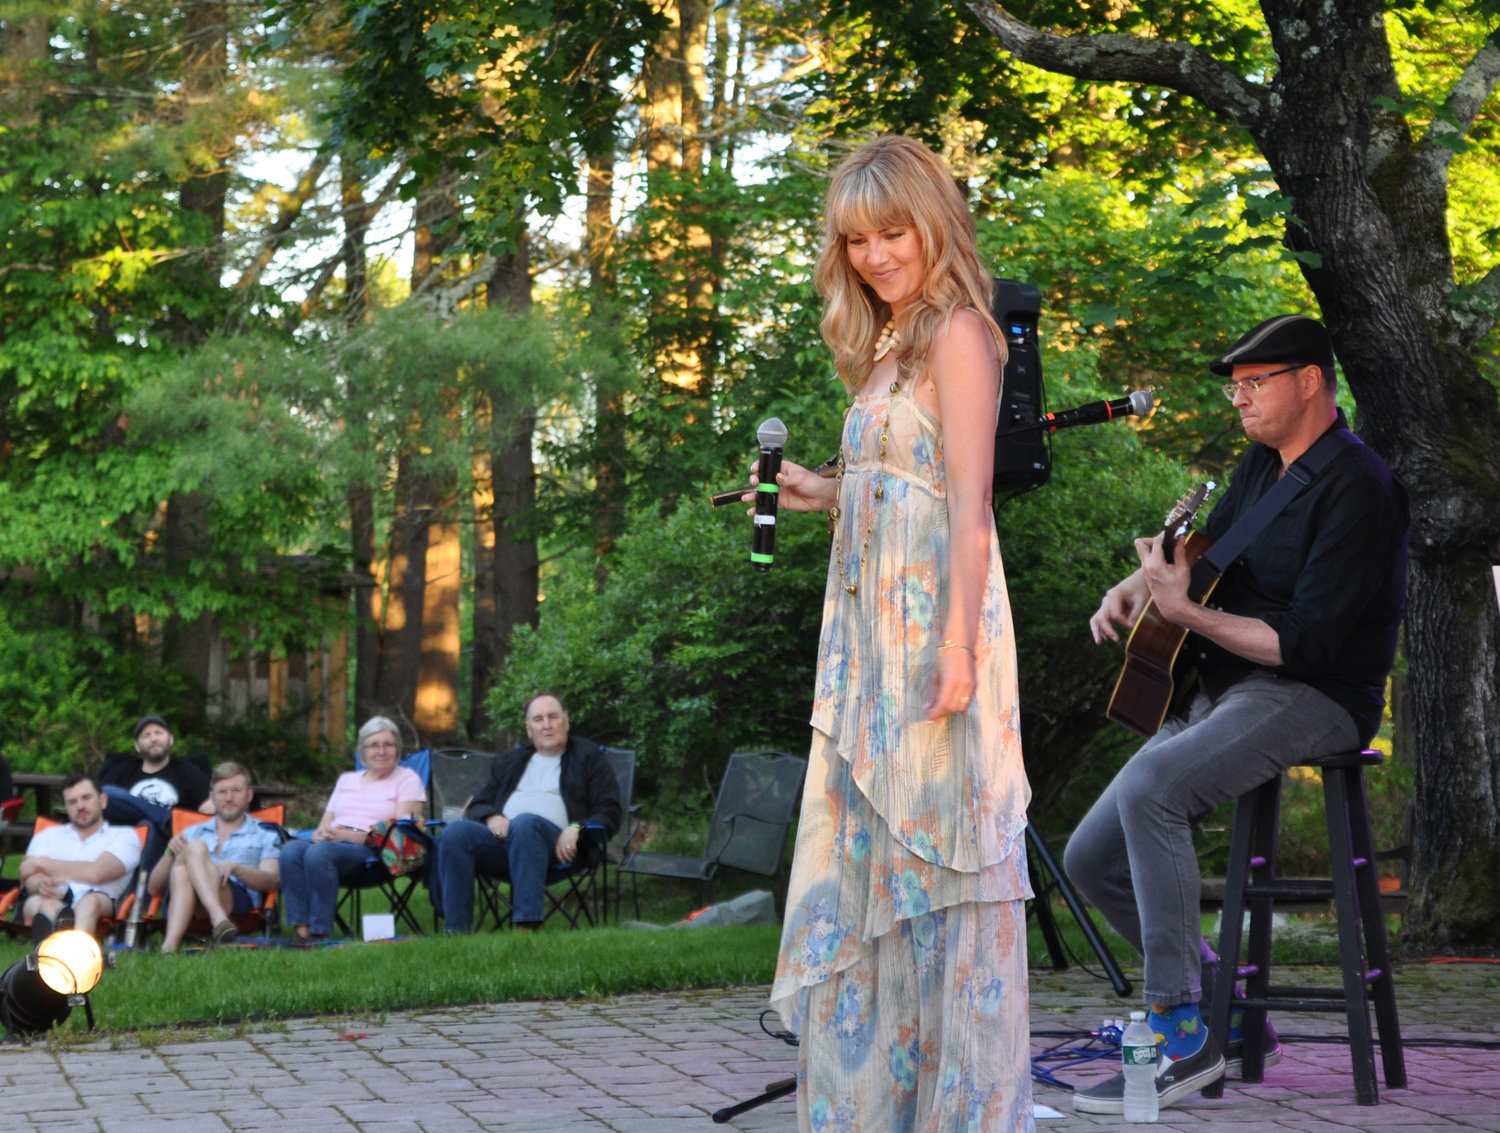 The 2021 Forestburgh Under the Stars series opened last weekend with singer Morgan James and blues musician Doug Wamble (see page XX).